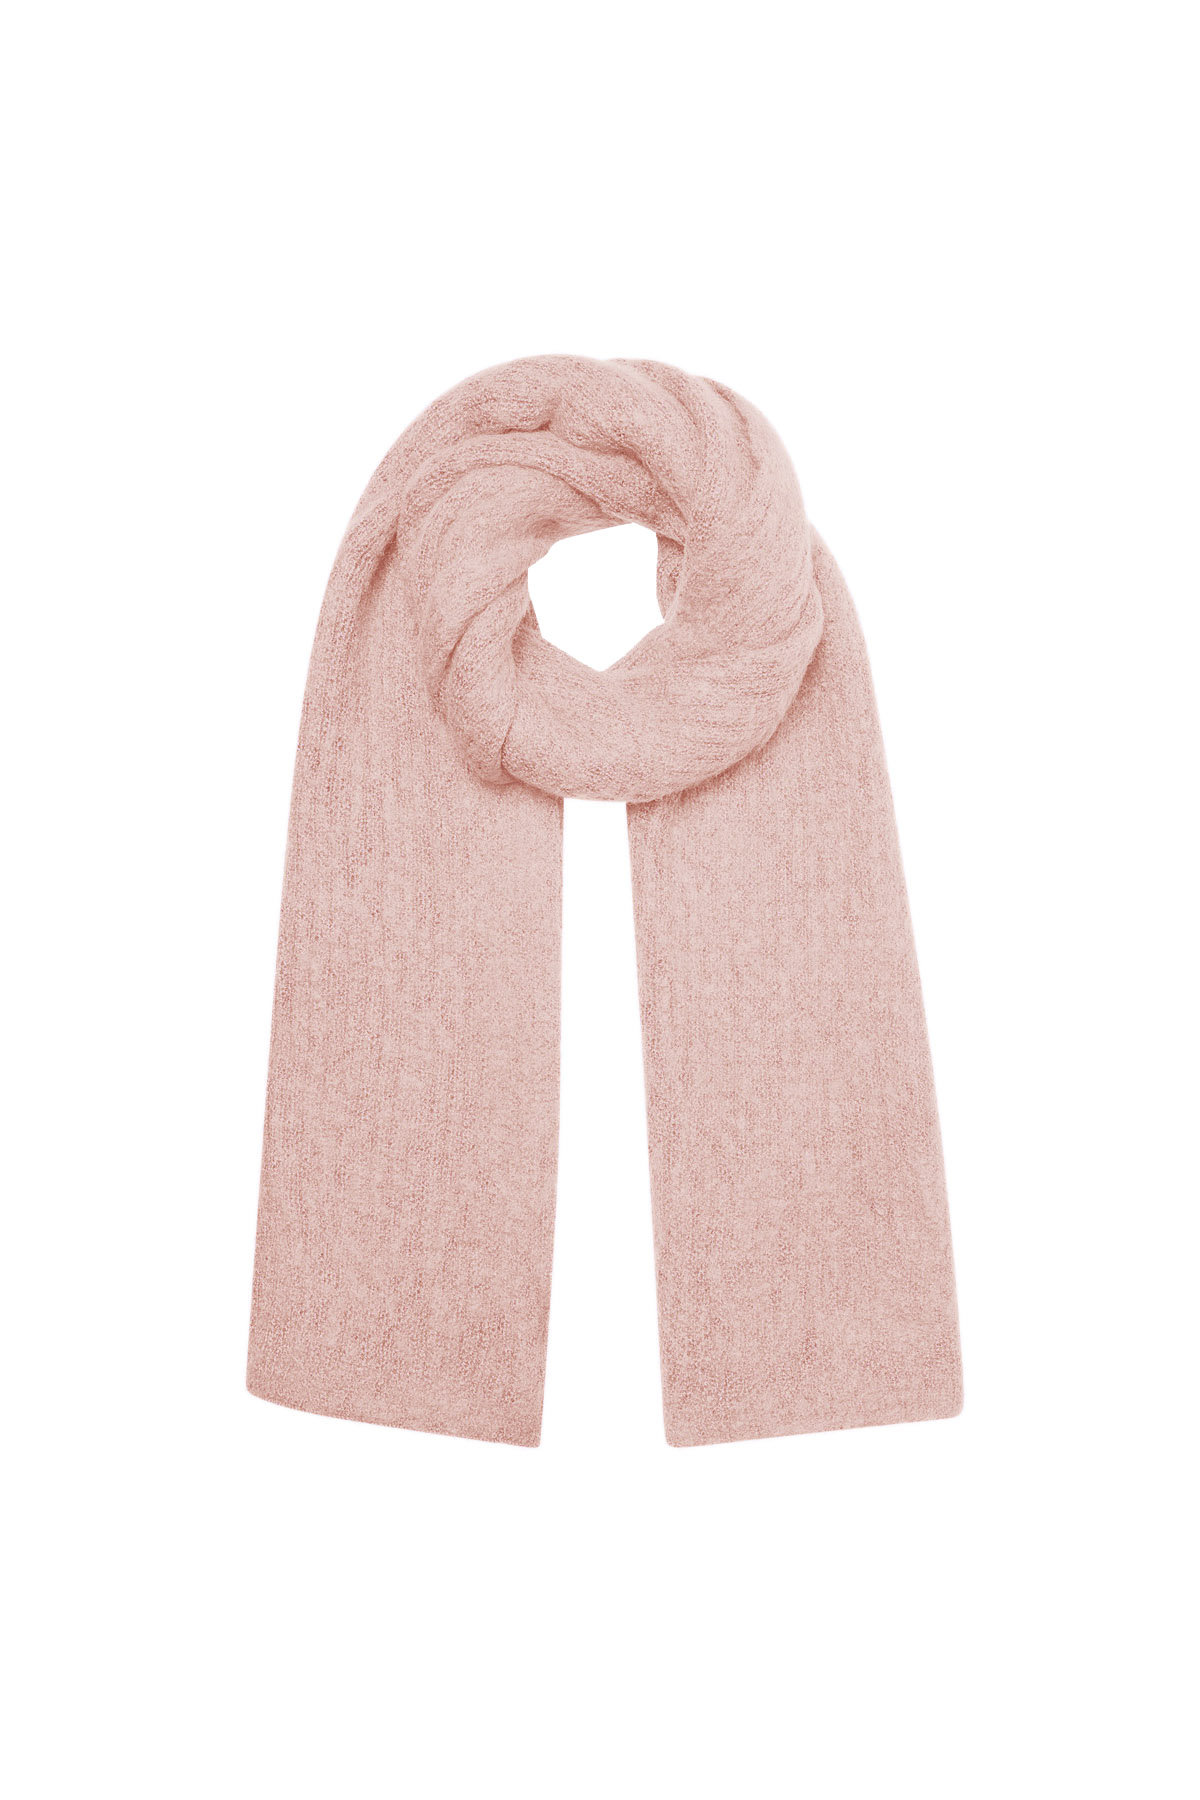 Scarf knitted plain - pale pink h5 